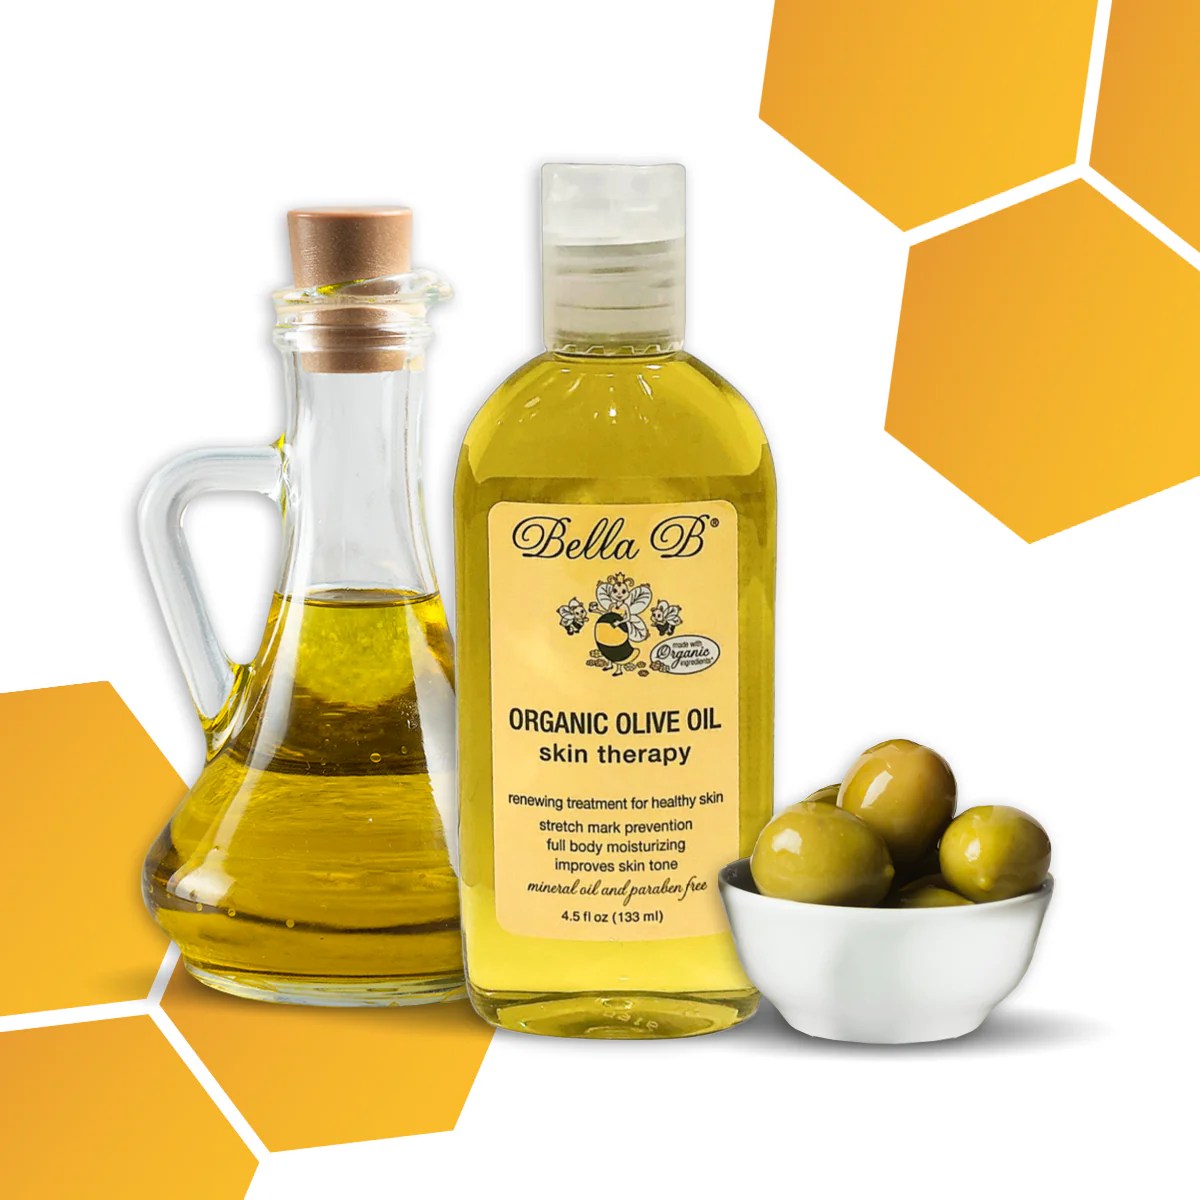 Olive Oil Skincare, The Natural Solution for Healthy, Glowing Skin